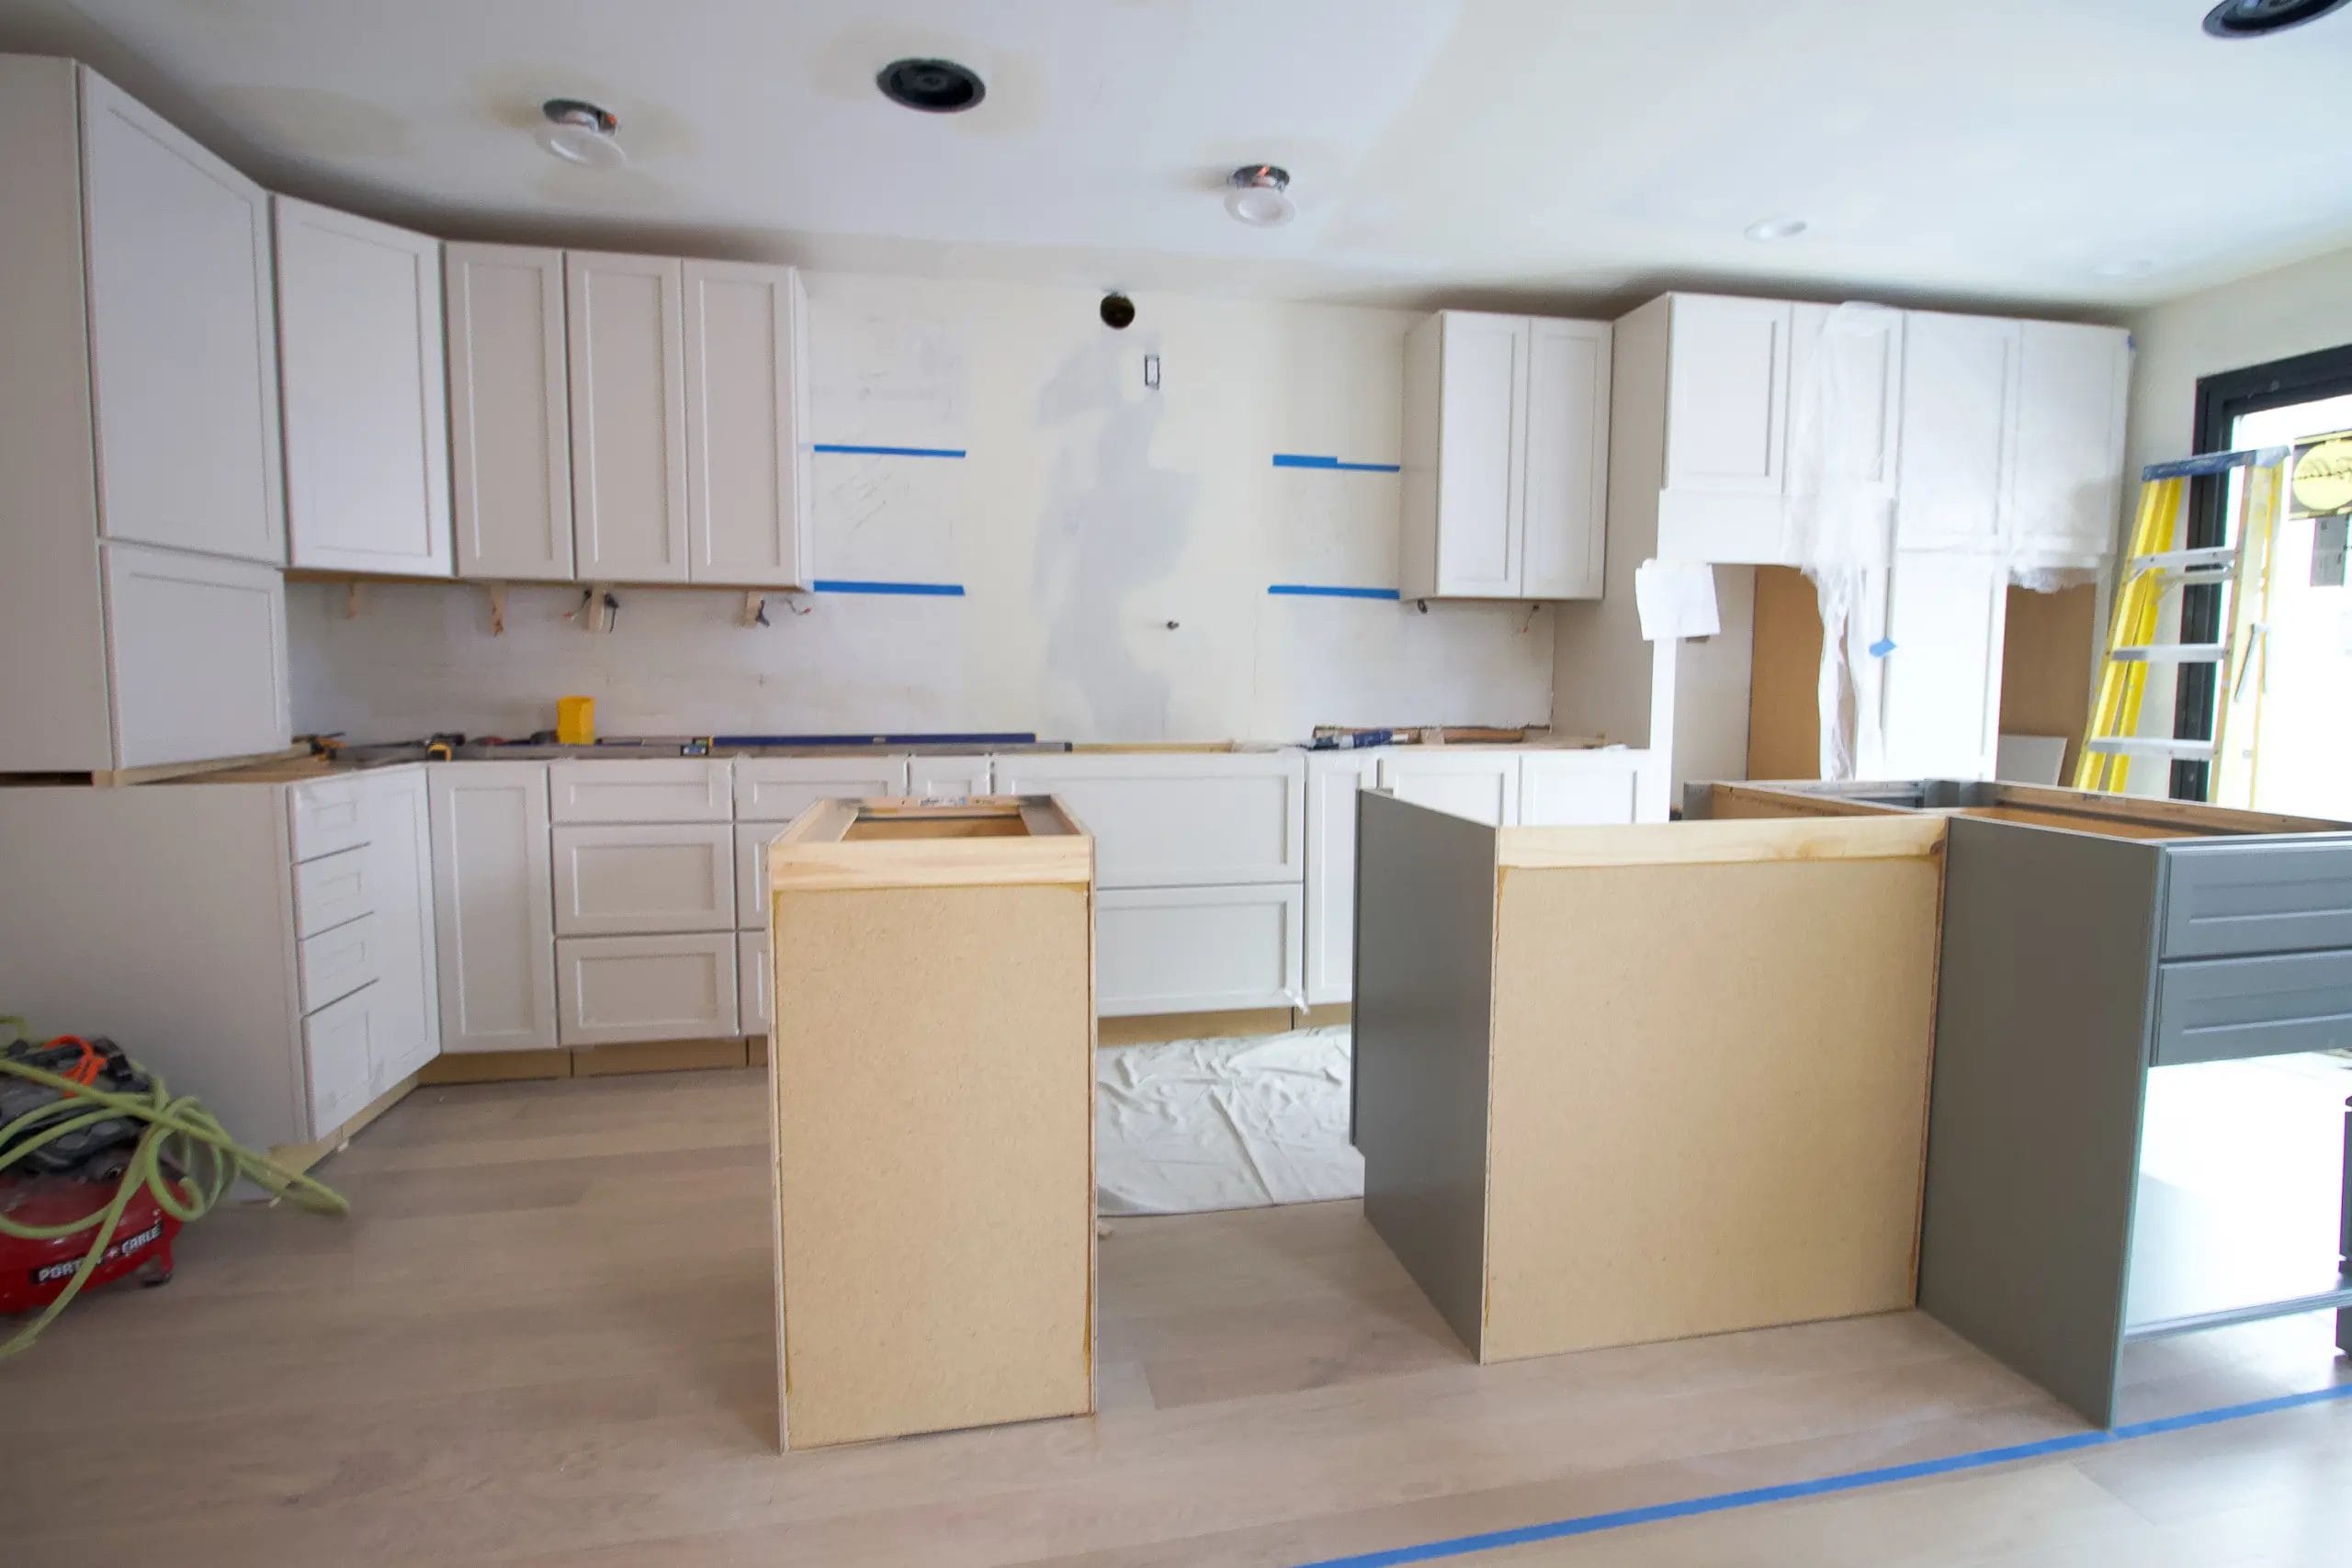 kitchen cabinets install 8 scaled 1